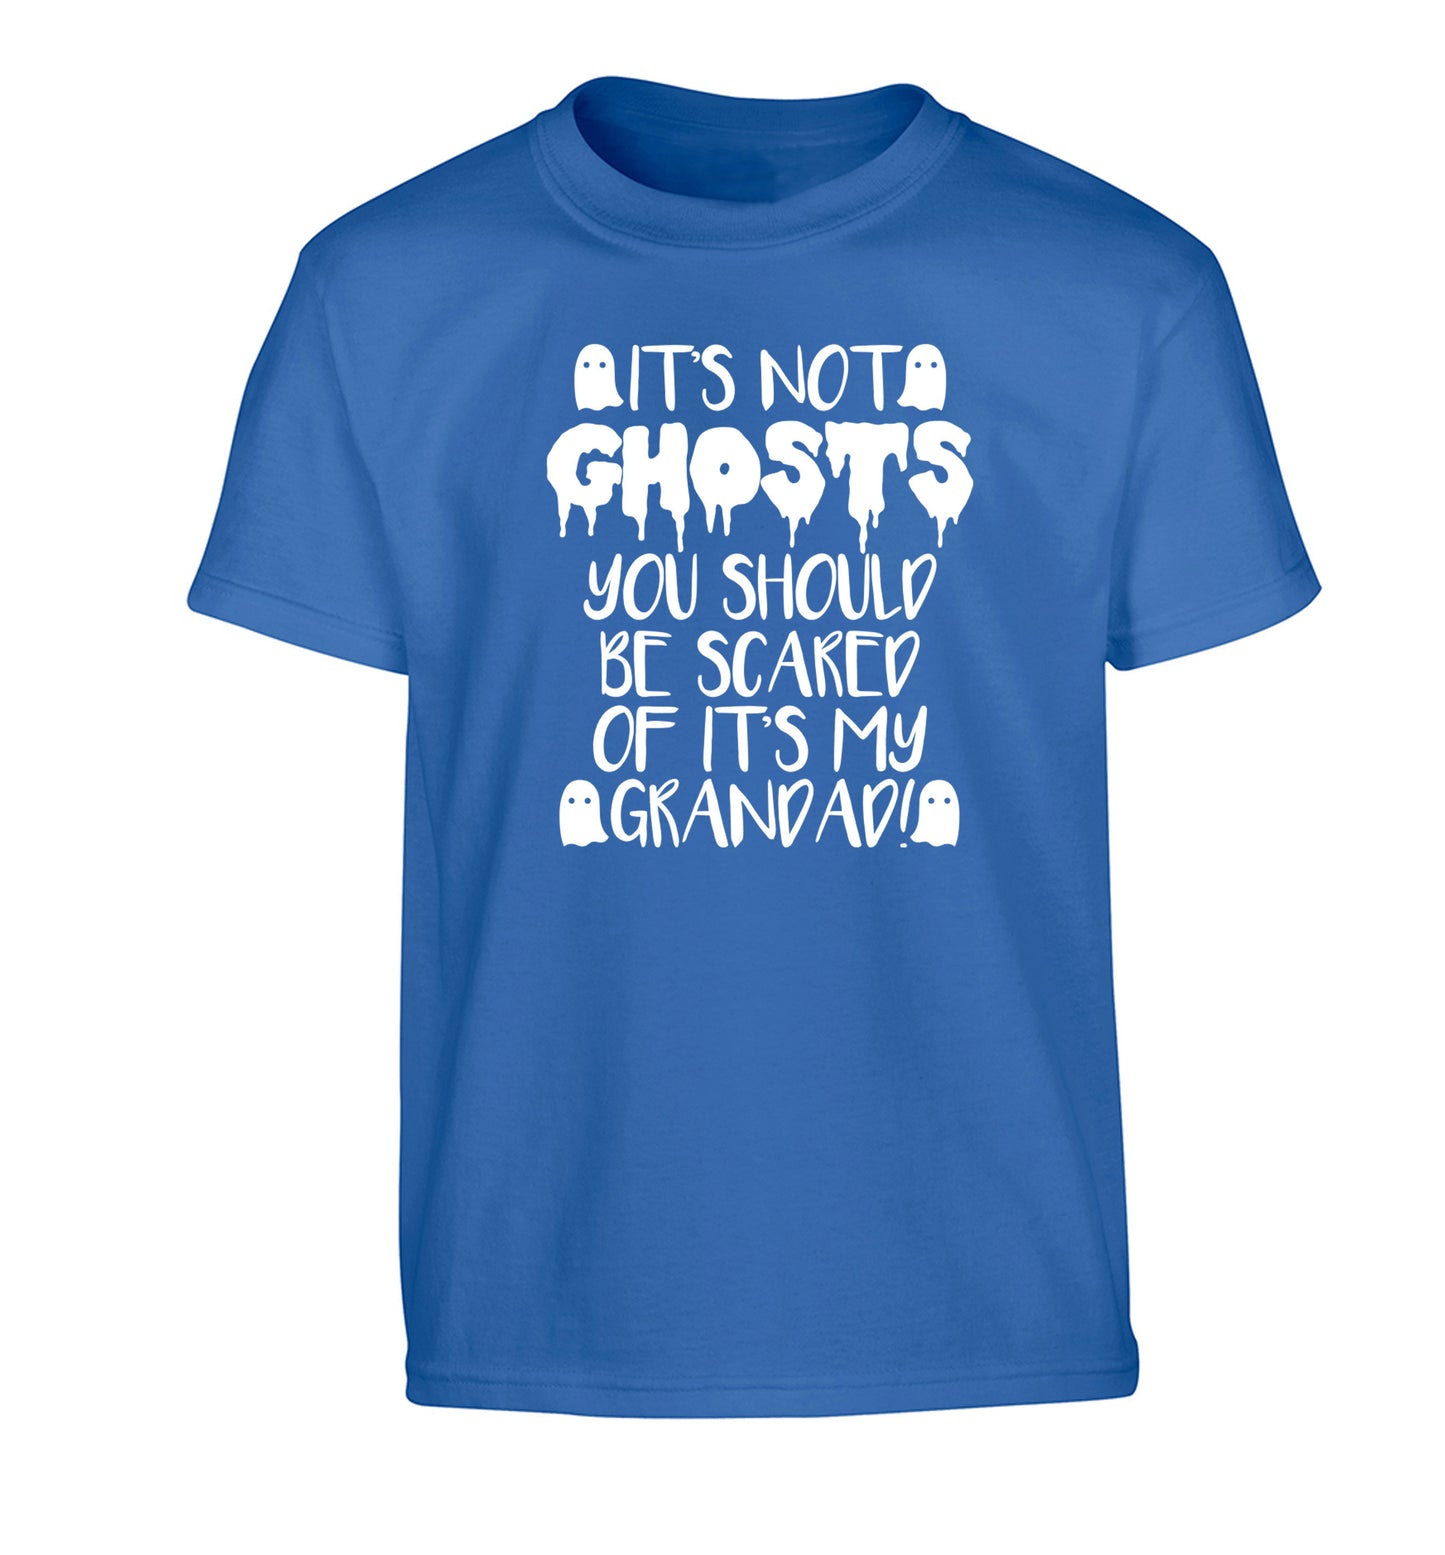 It's not ghosts you should be scared of it's my grandad! Children's blue Tshirt 12-14 Years